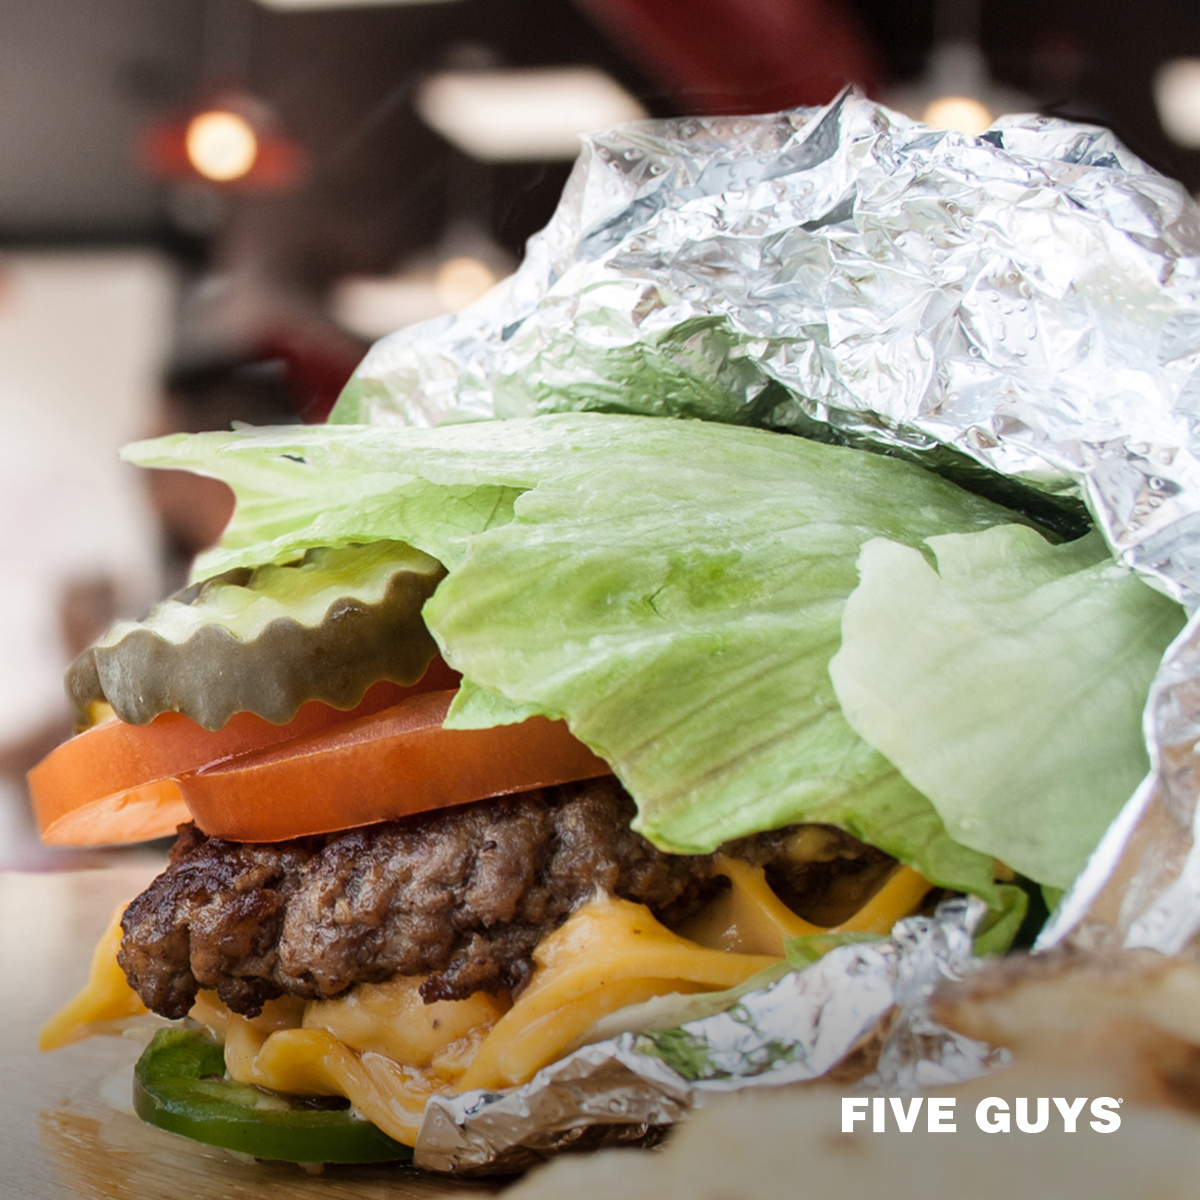 five guys lettuce wrapped burger for people who are gluten free